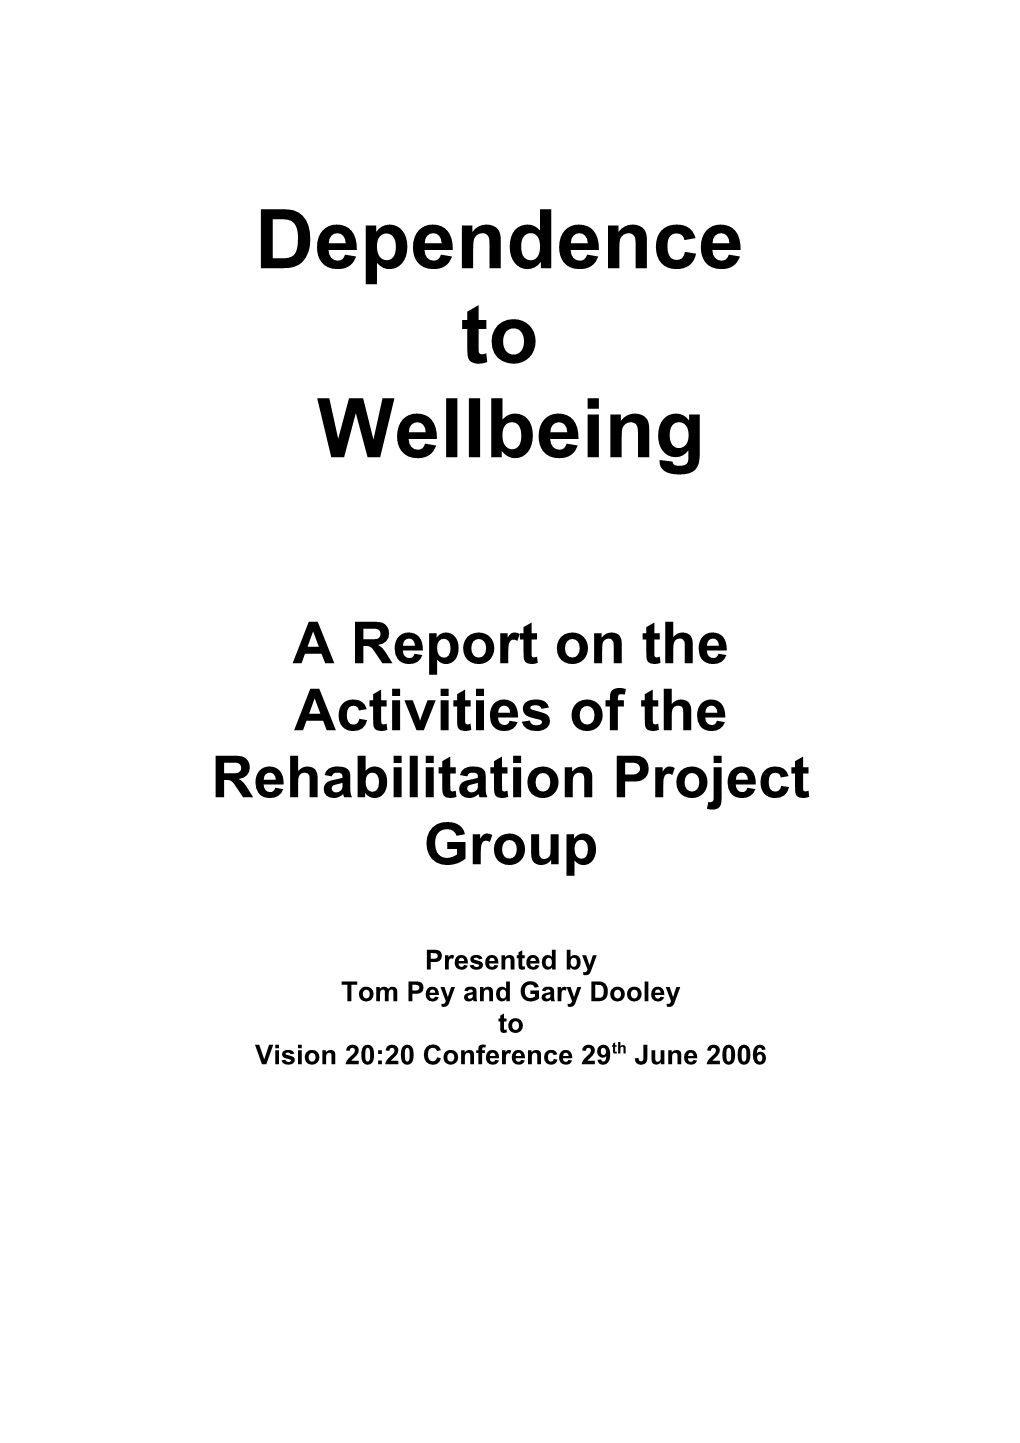 Dependence to Well Being: a Report on the Activities of the Rehabilitation Project Group